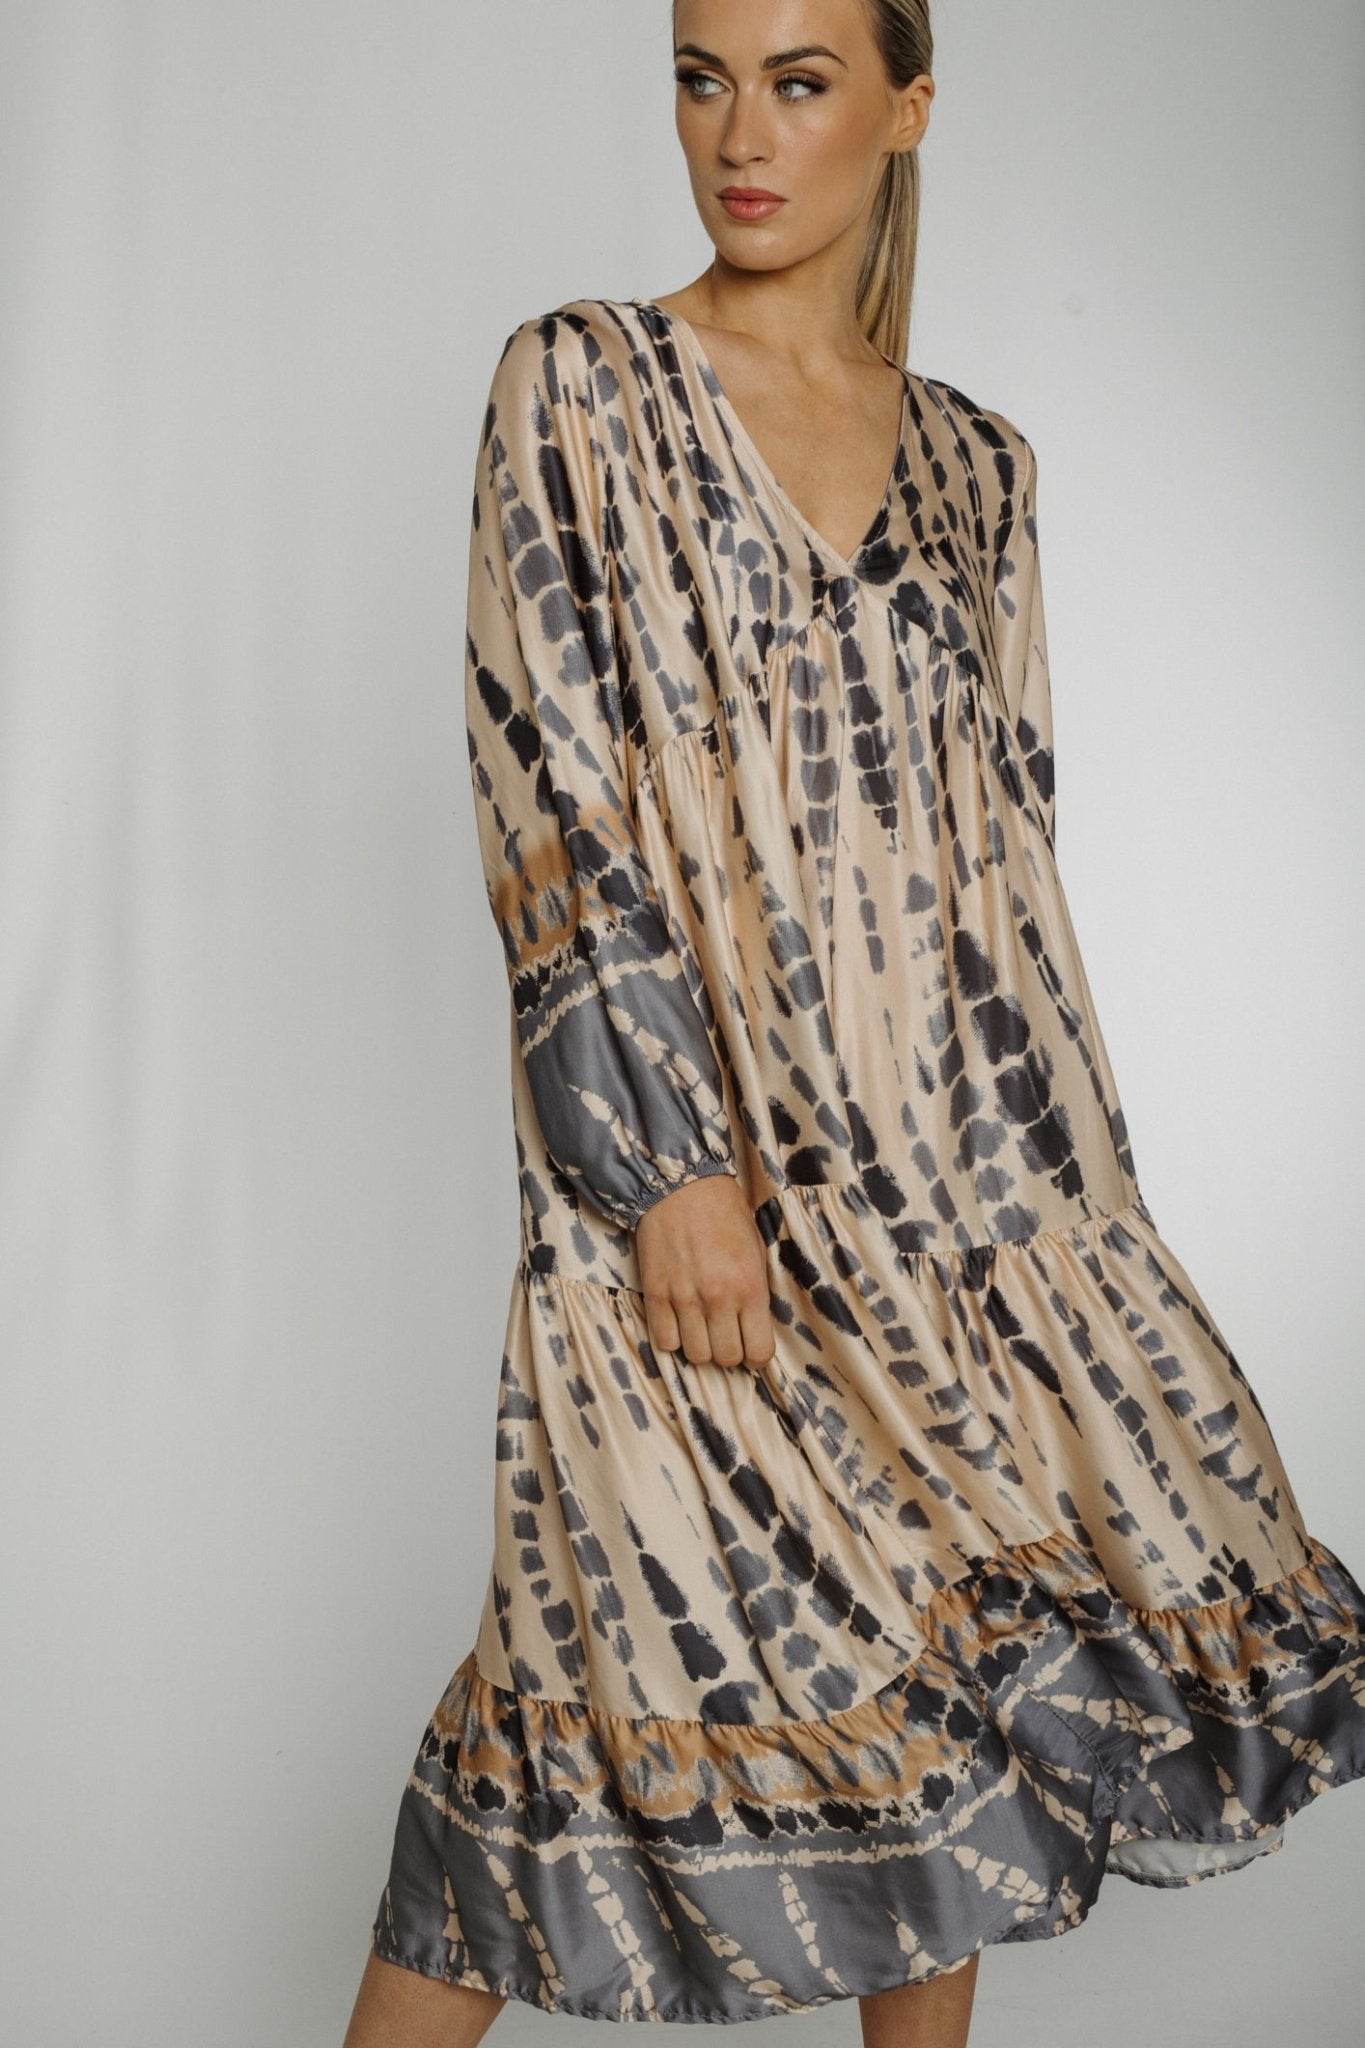 Belle Abstract Printed Dess In Neutral Mix - The Walk in Wardrobe